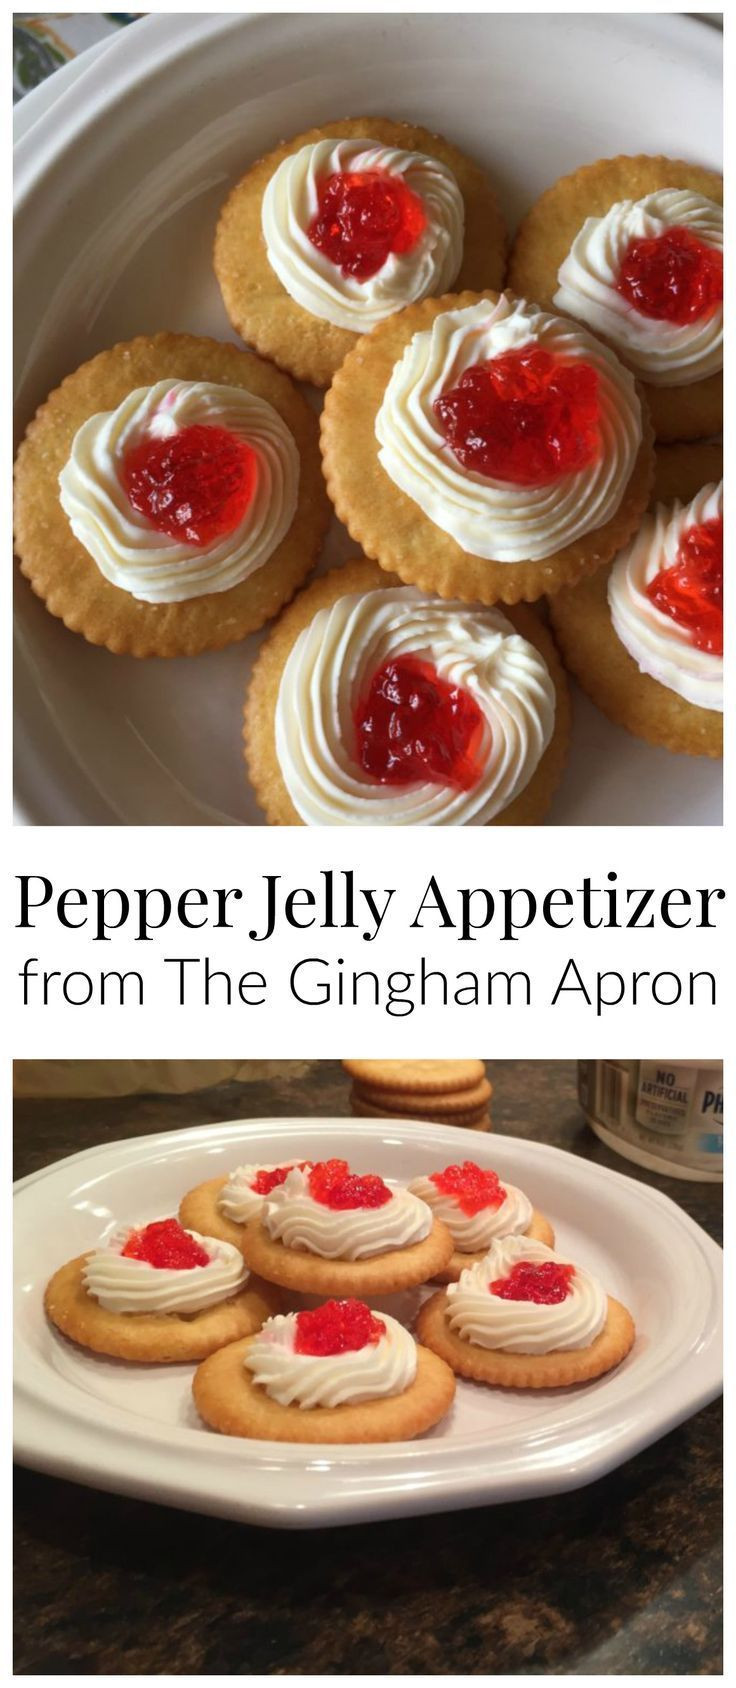 Cream Cheese Appetizers Jelly
 Pepper Jelly Appetizer